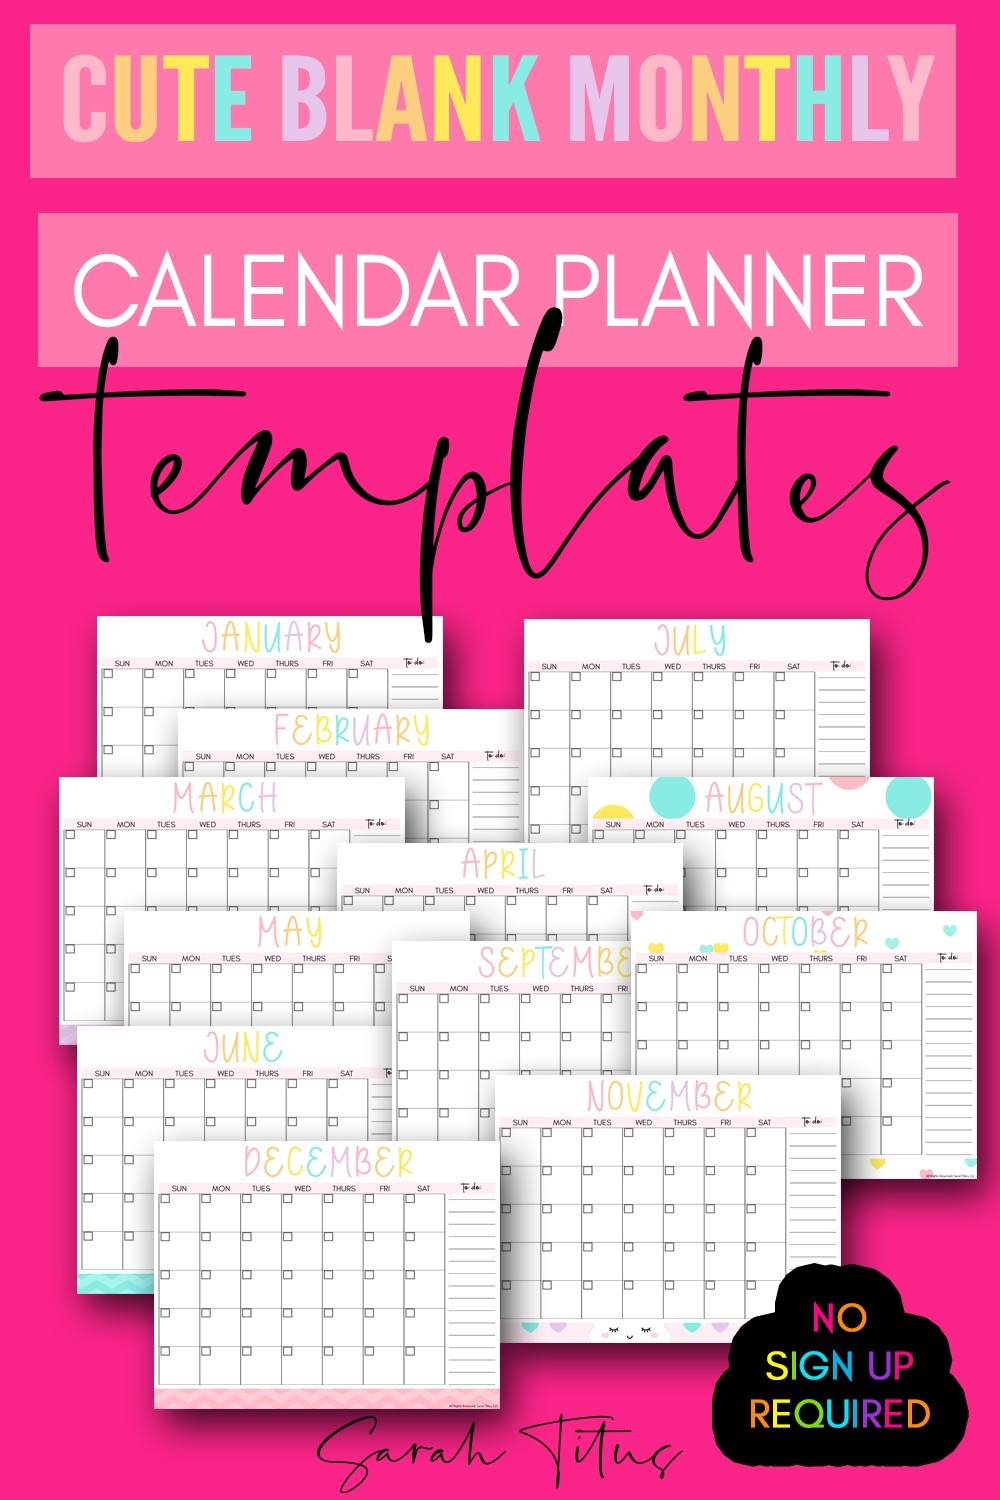 Cute Blank Monthly Calendar Planner Templates - Sarah Titus-Blank Monthly Calendar Template To Fill In